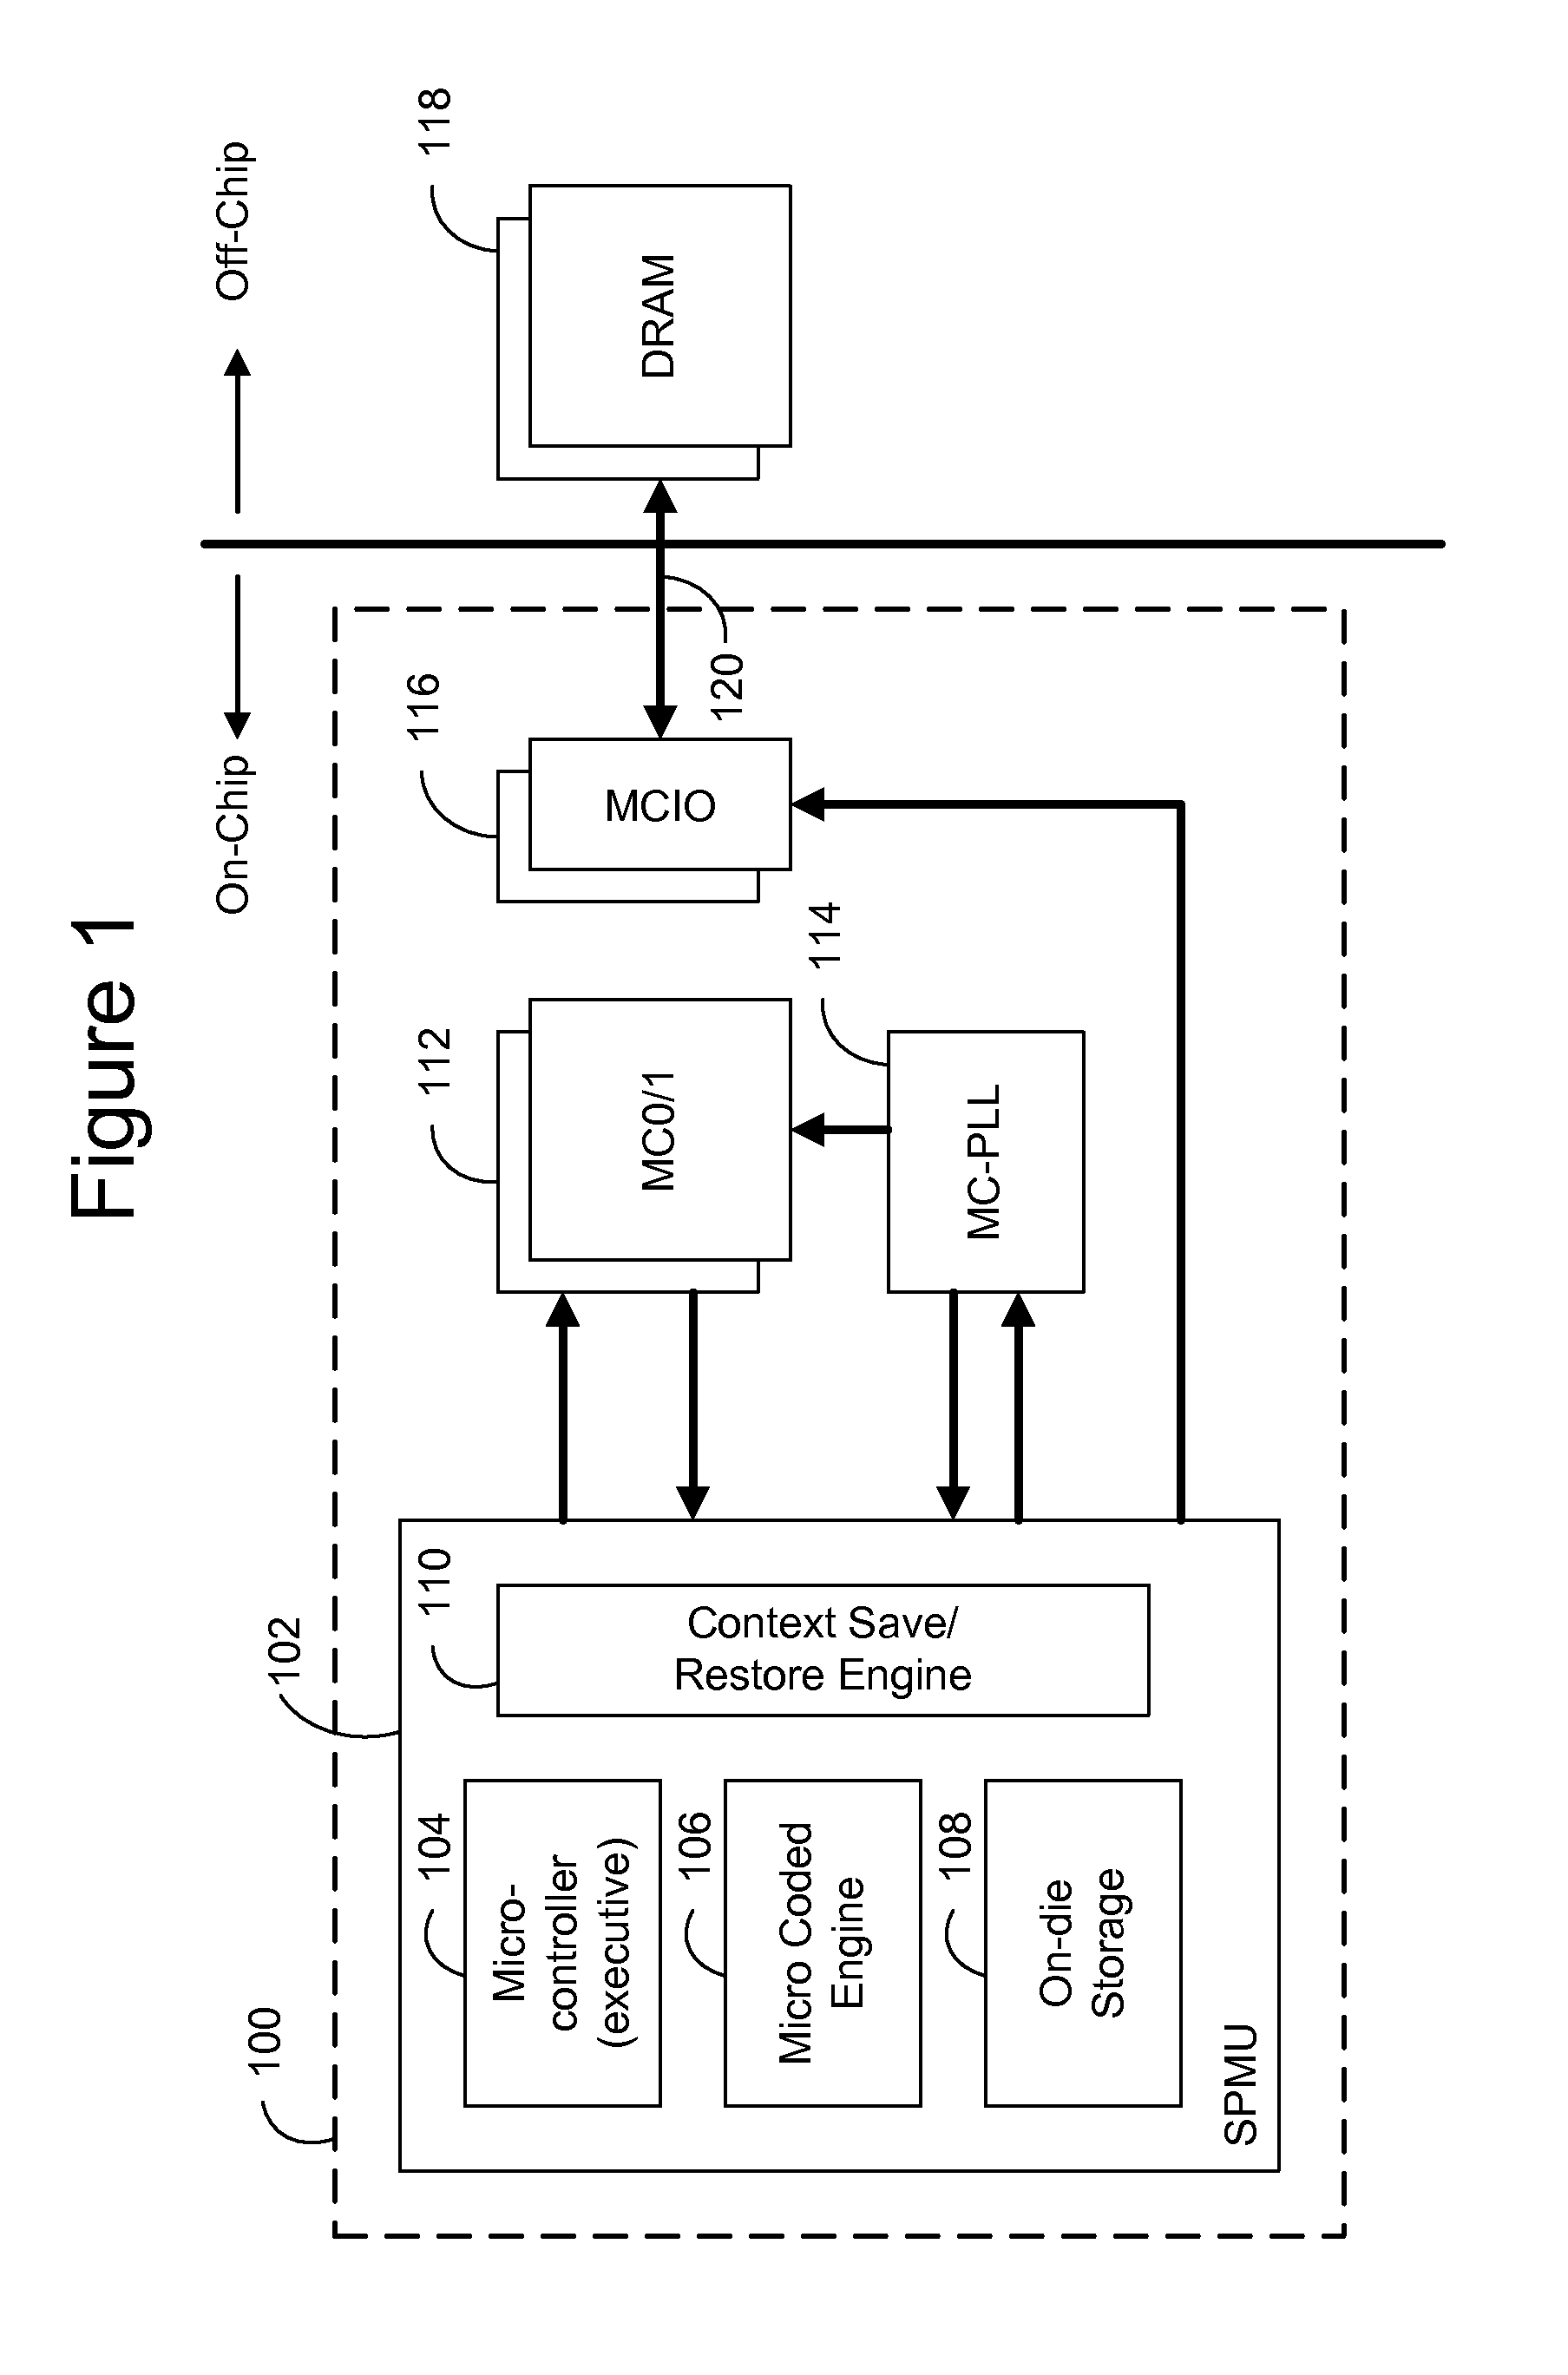 Training, power-gating, and dynamic frequency changing of a memory controller